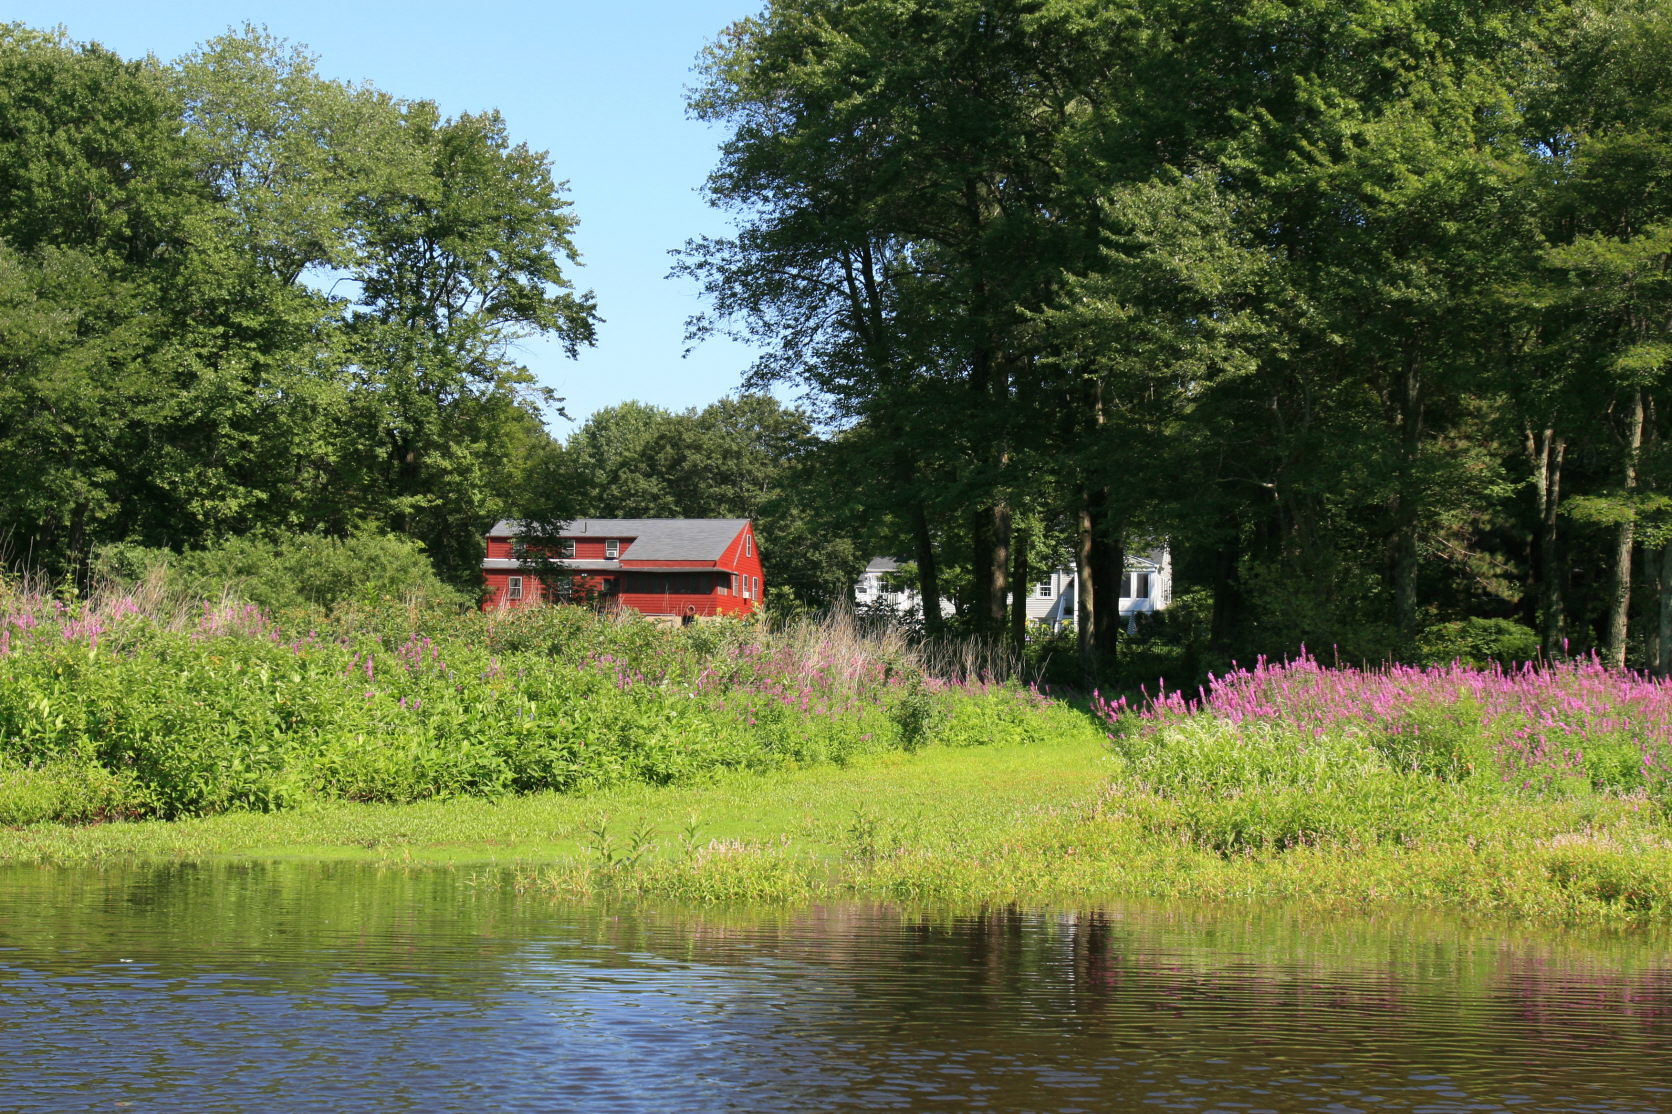 Red Barn on the River (user submitted)